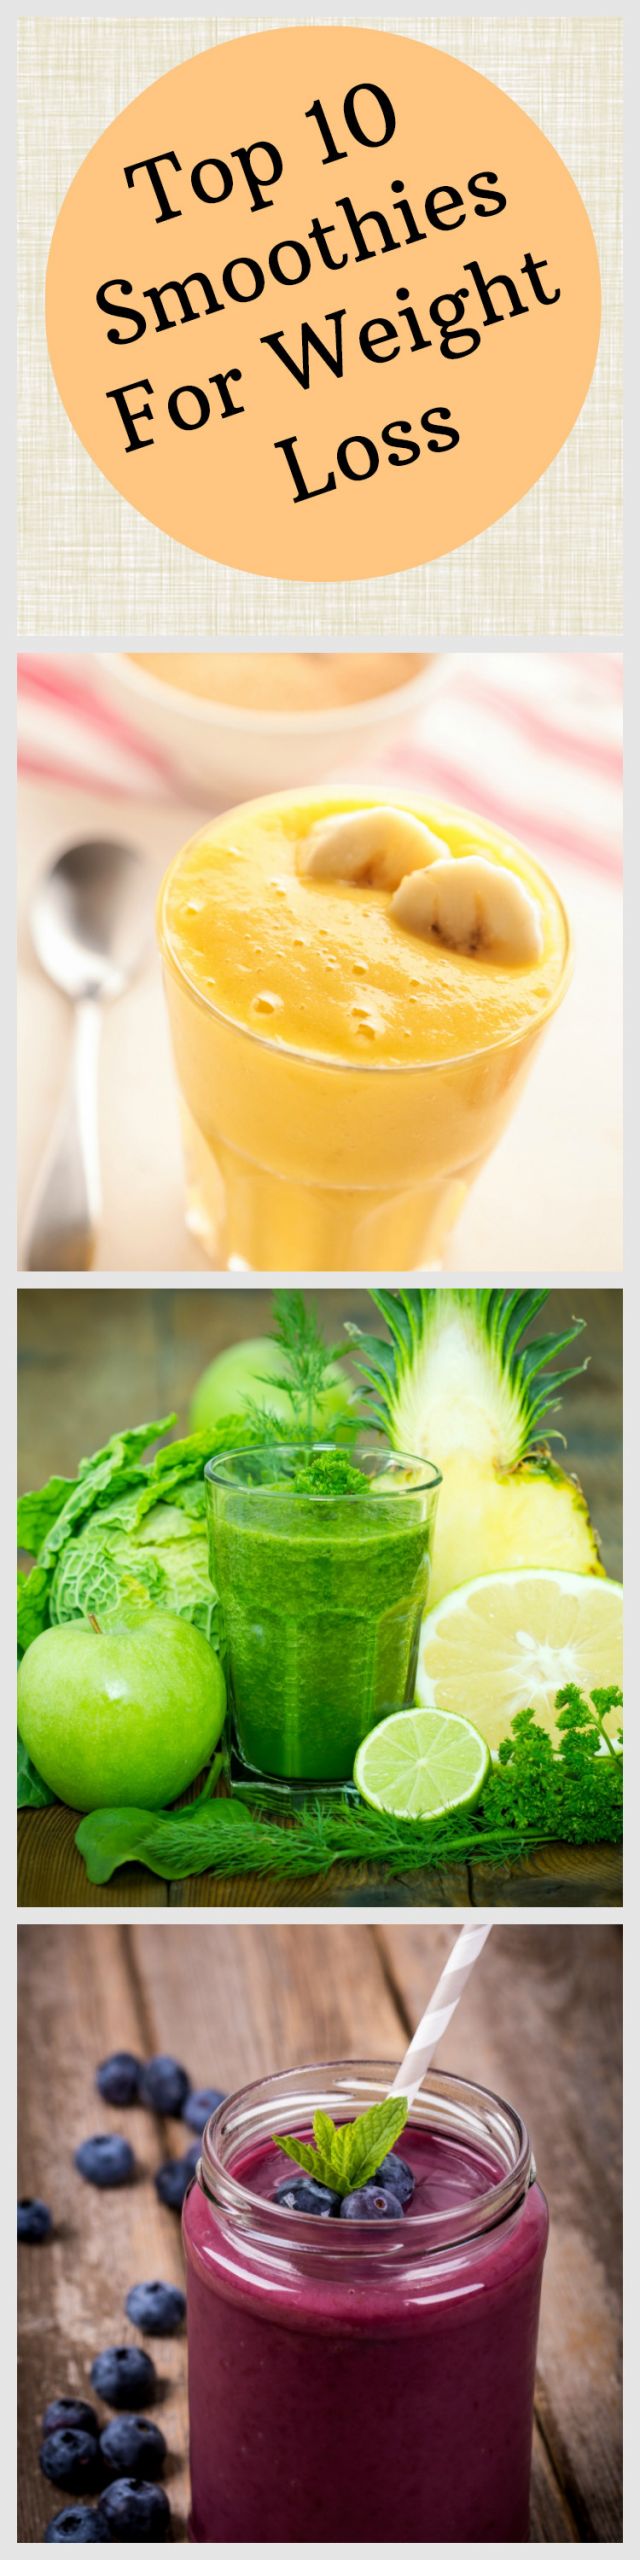 Loss Weight Smoothie Recipes
 10 Awesome Smoothies for Weight Loss All Nutribullet Recipes